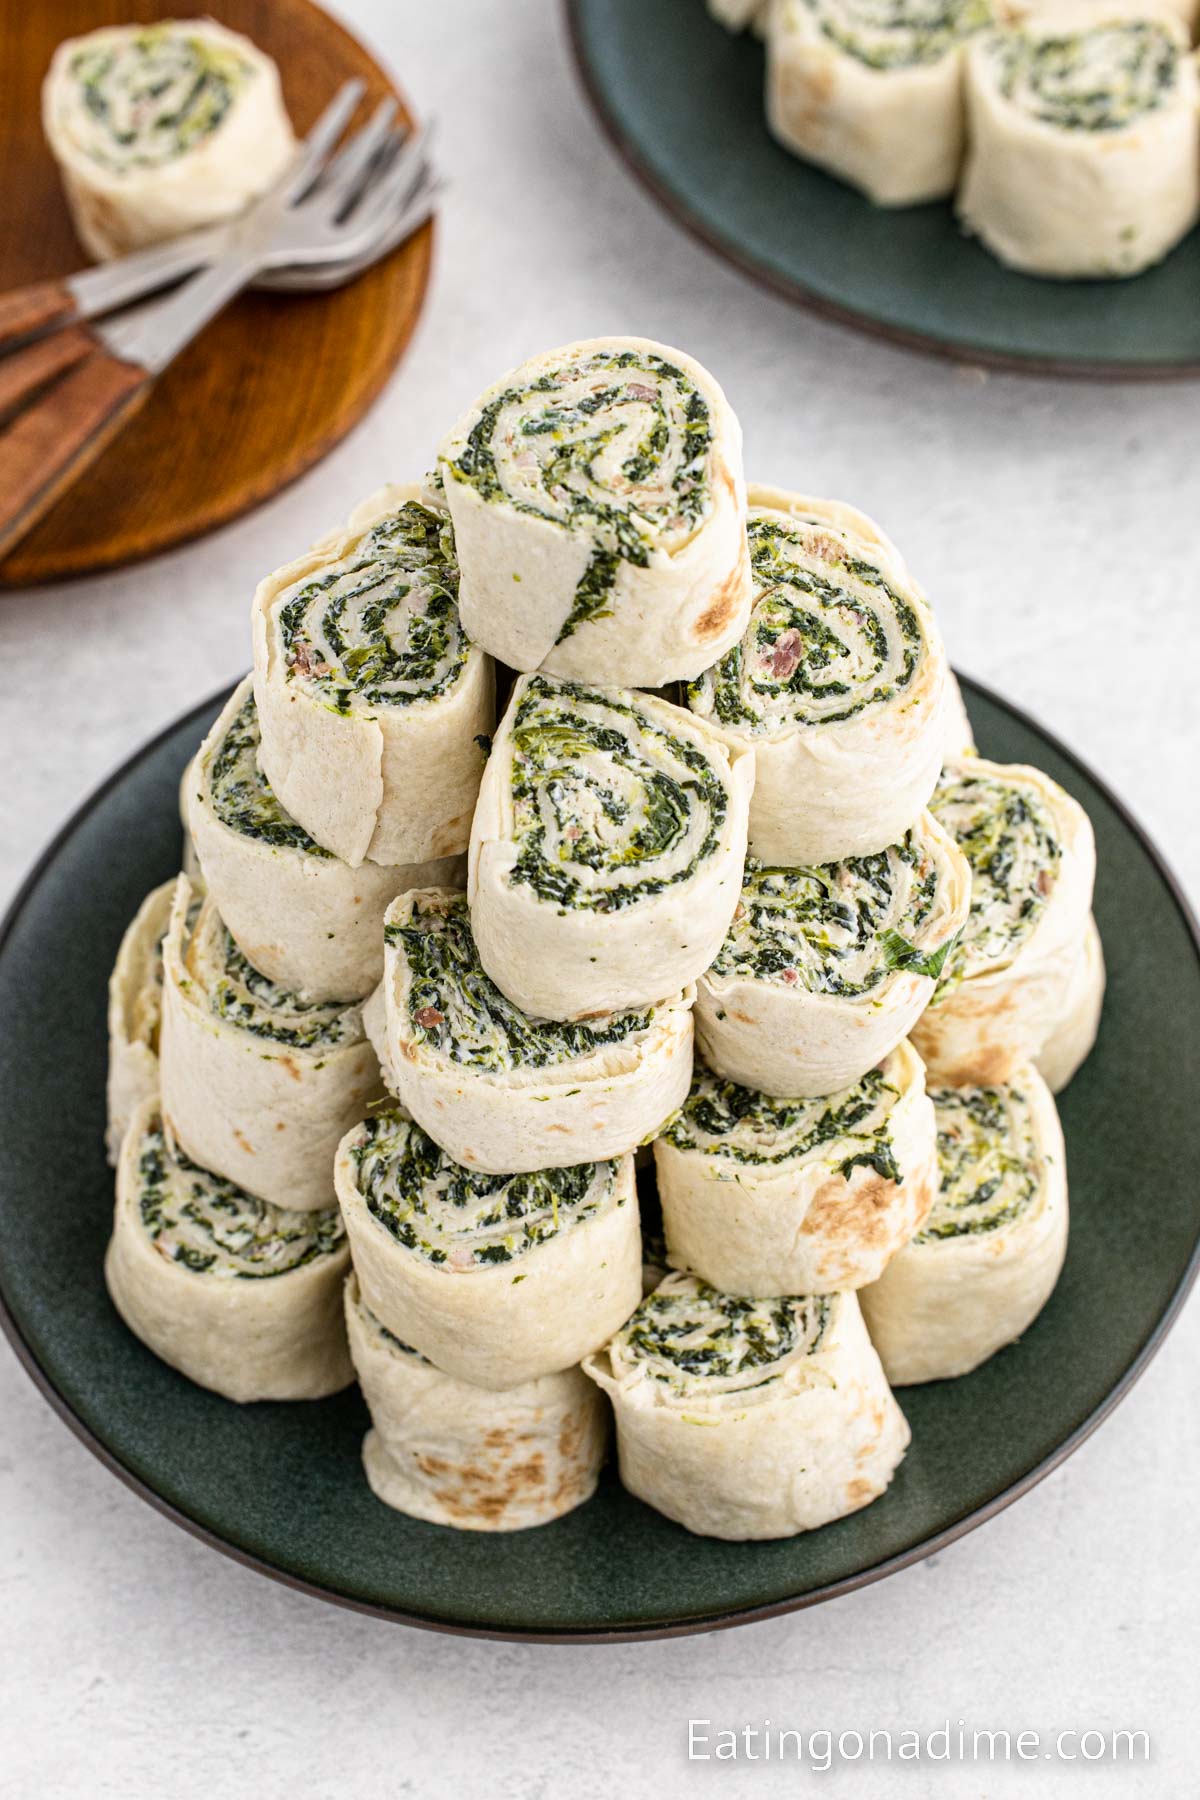 Spinach Rolls Ups stacked on a plate